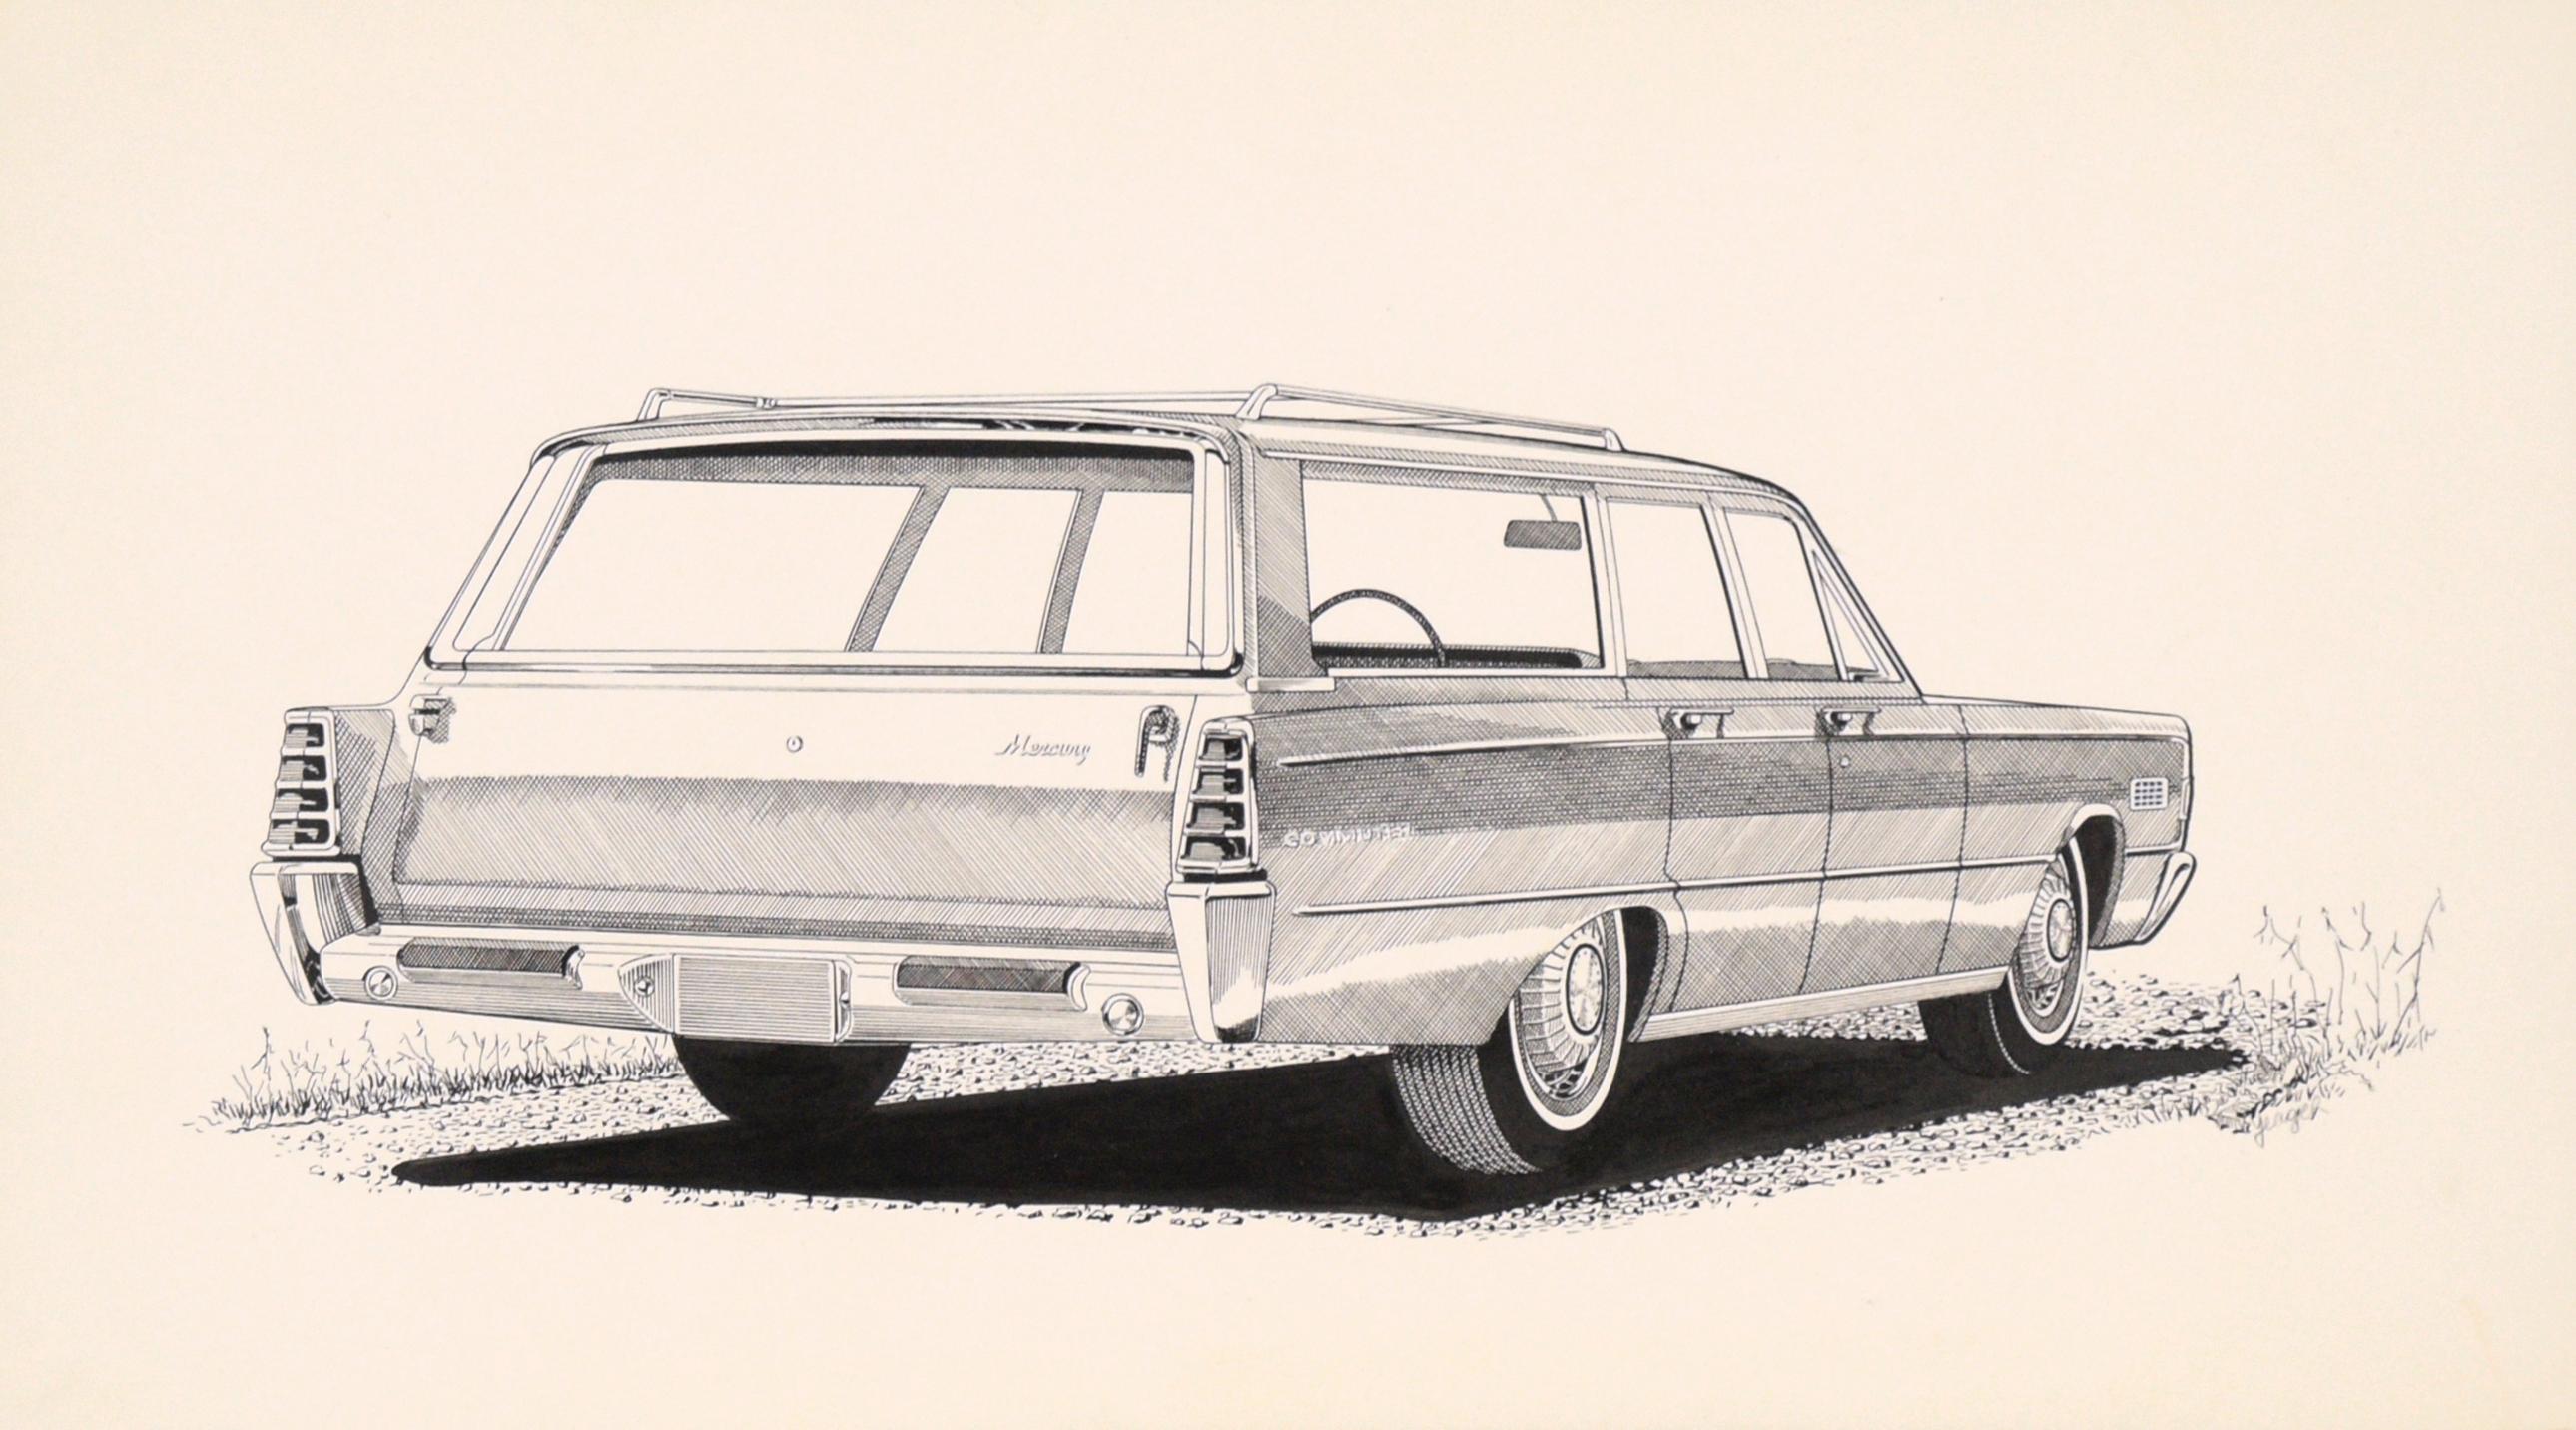 1966 Mercury Commuter Station Wagon, Antique Technical Car Illustration - Art by Joseph Yeager